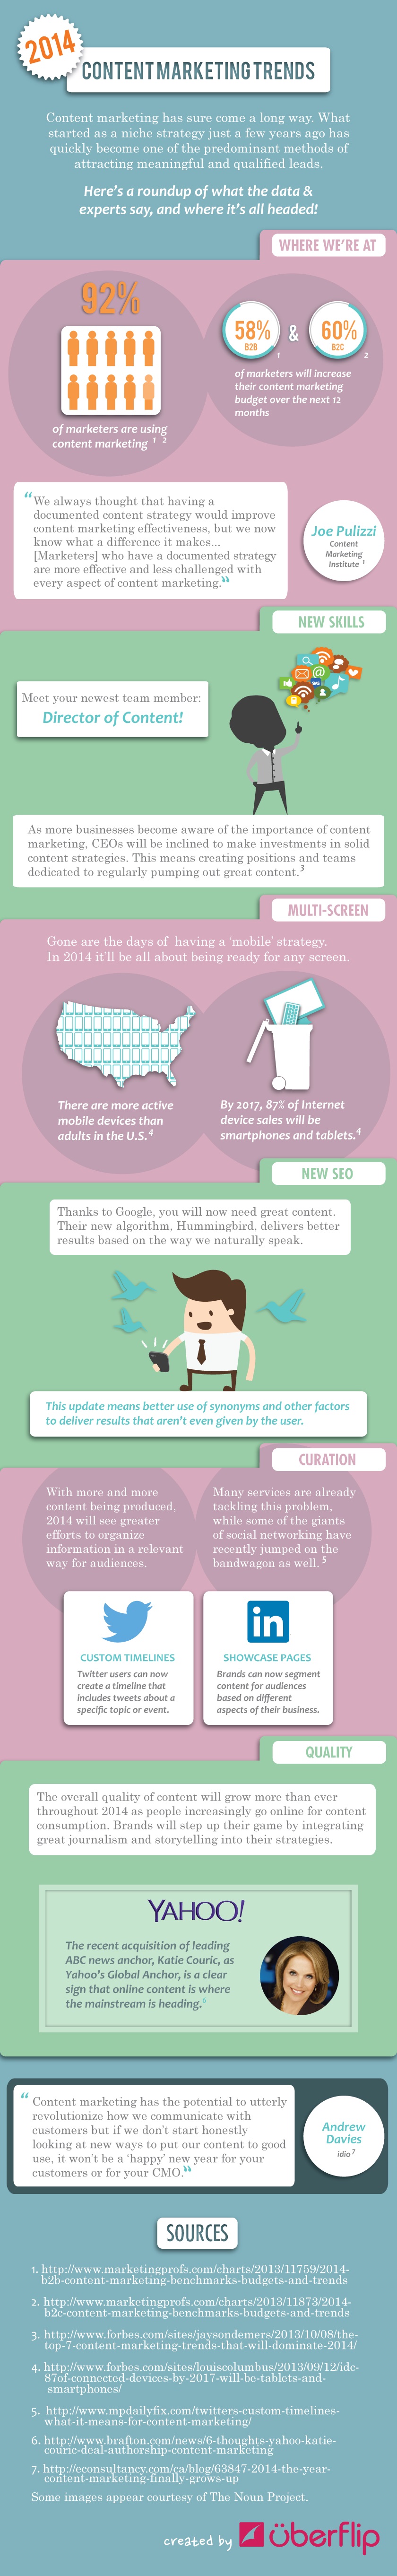 final-2014-trends-infographic-alternate-colours2